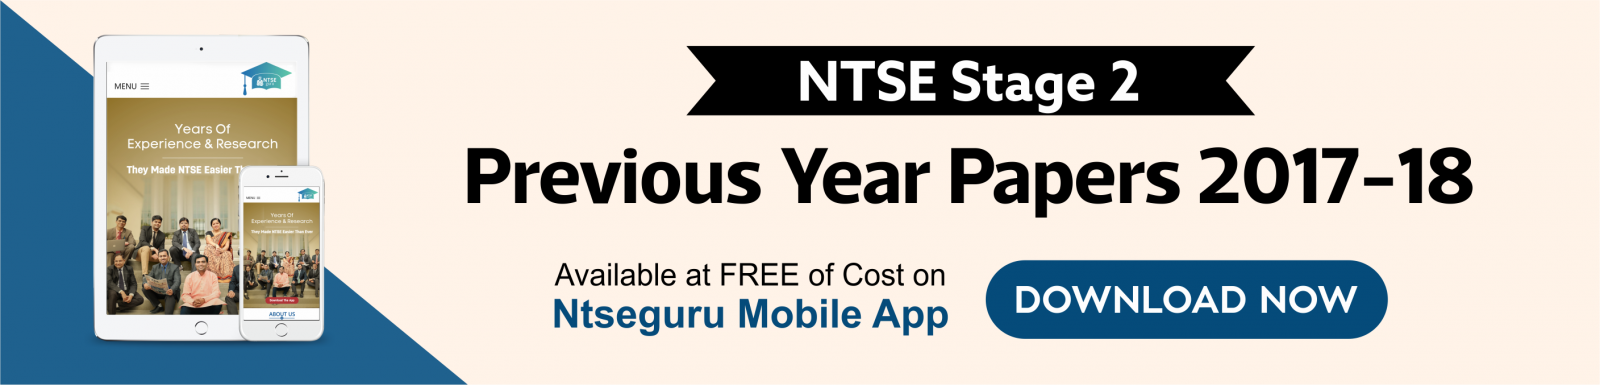 NTSE Stage 2 Previous Year Papers 2017-18